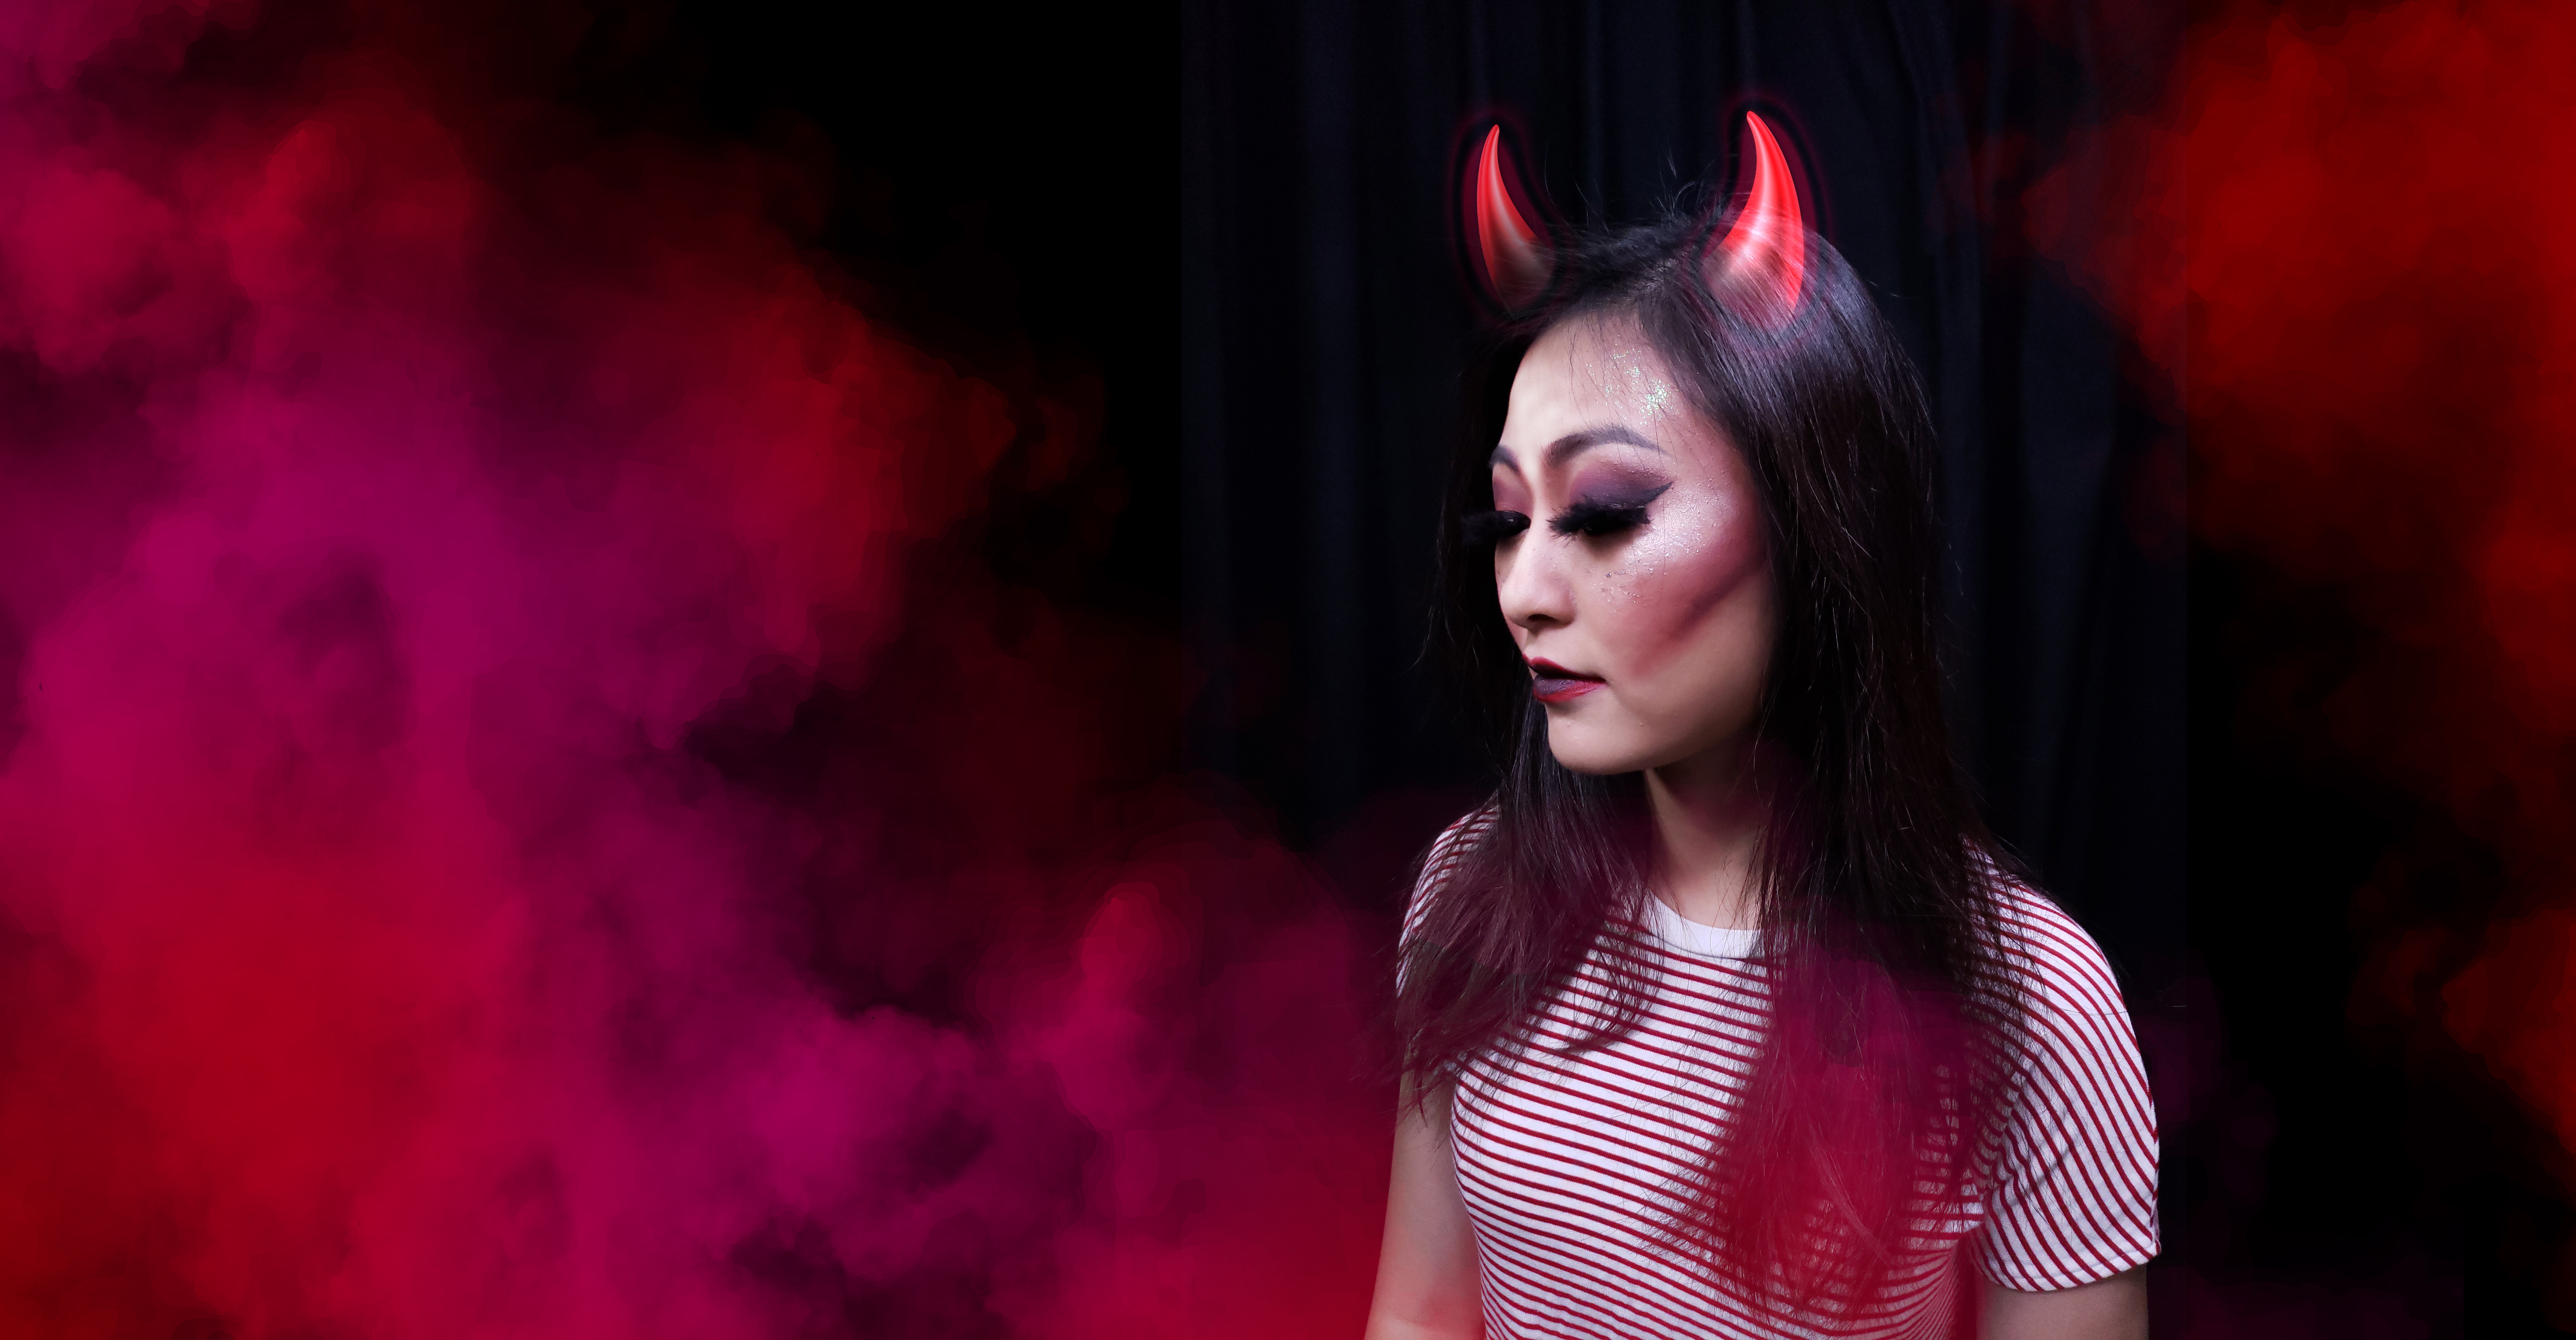 Just a few strokes of cleverly applied make-up can turn you into a devil this Halloween. Photos: Aydee Tee